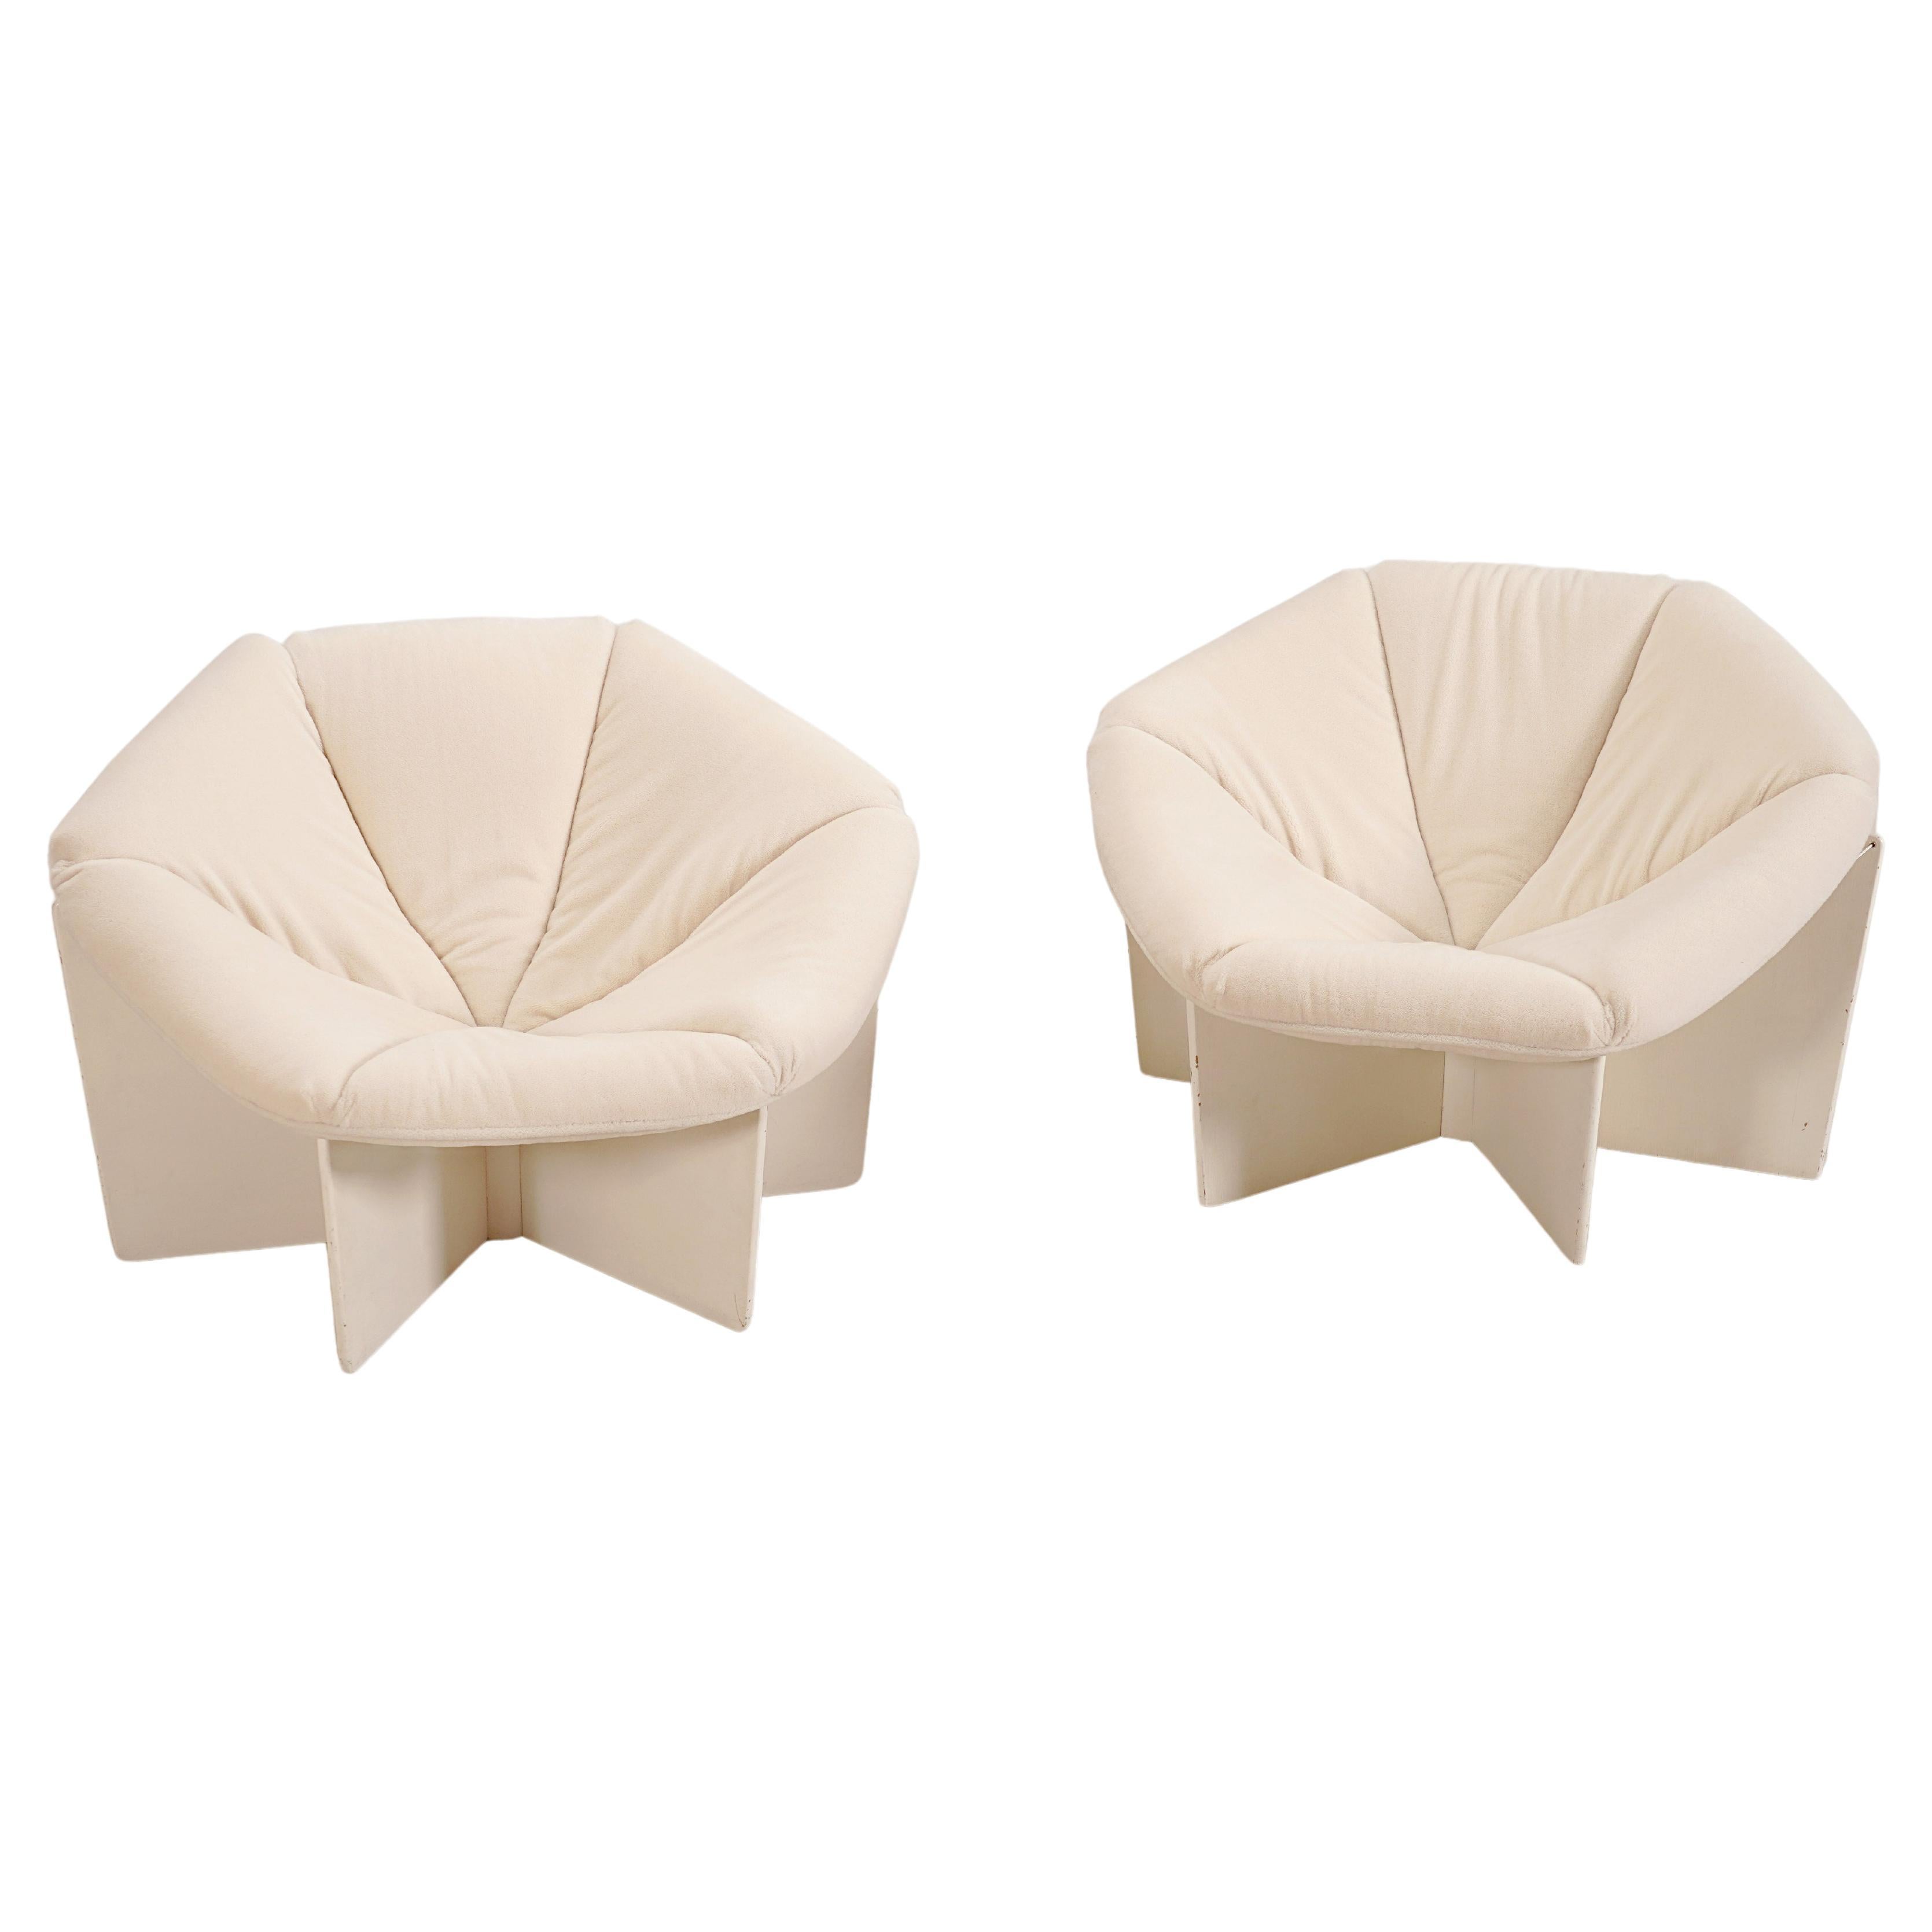 Pierre Paulin, Pair of Spider Lounge Chairs "Model F678" for Artifort. 1966 For Sale